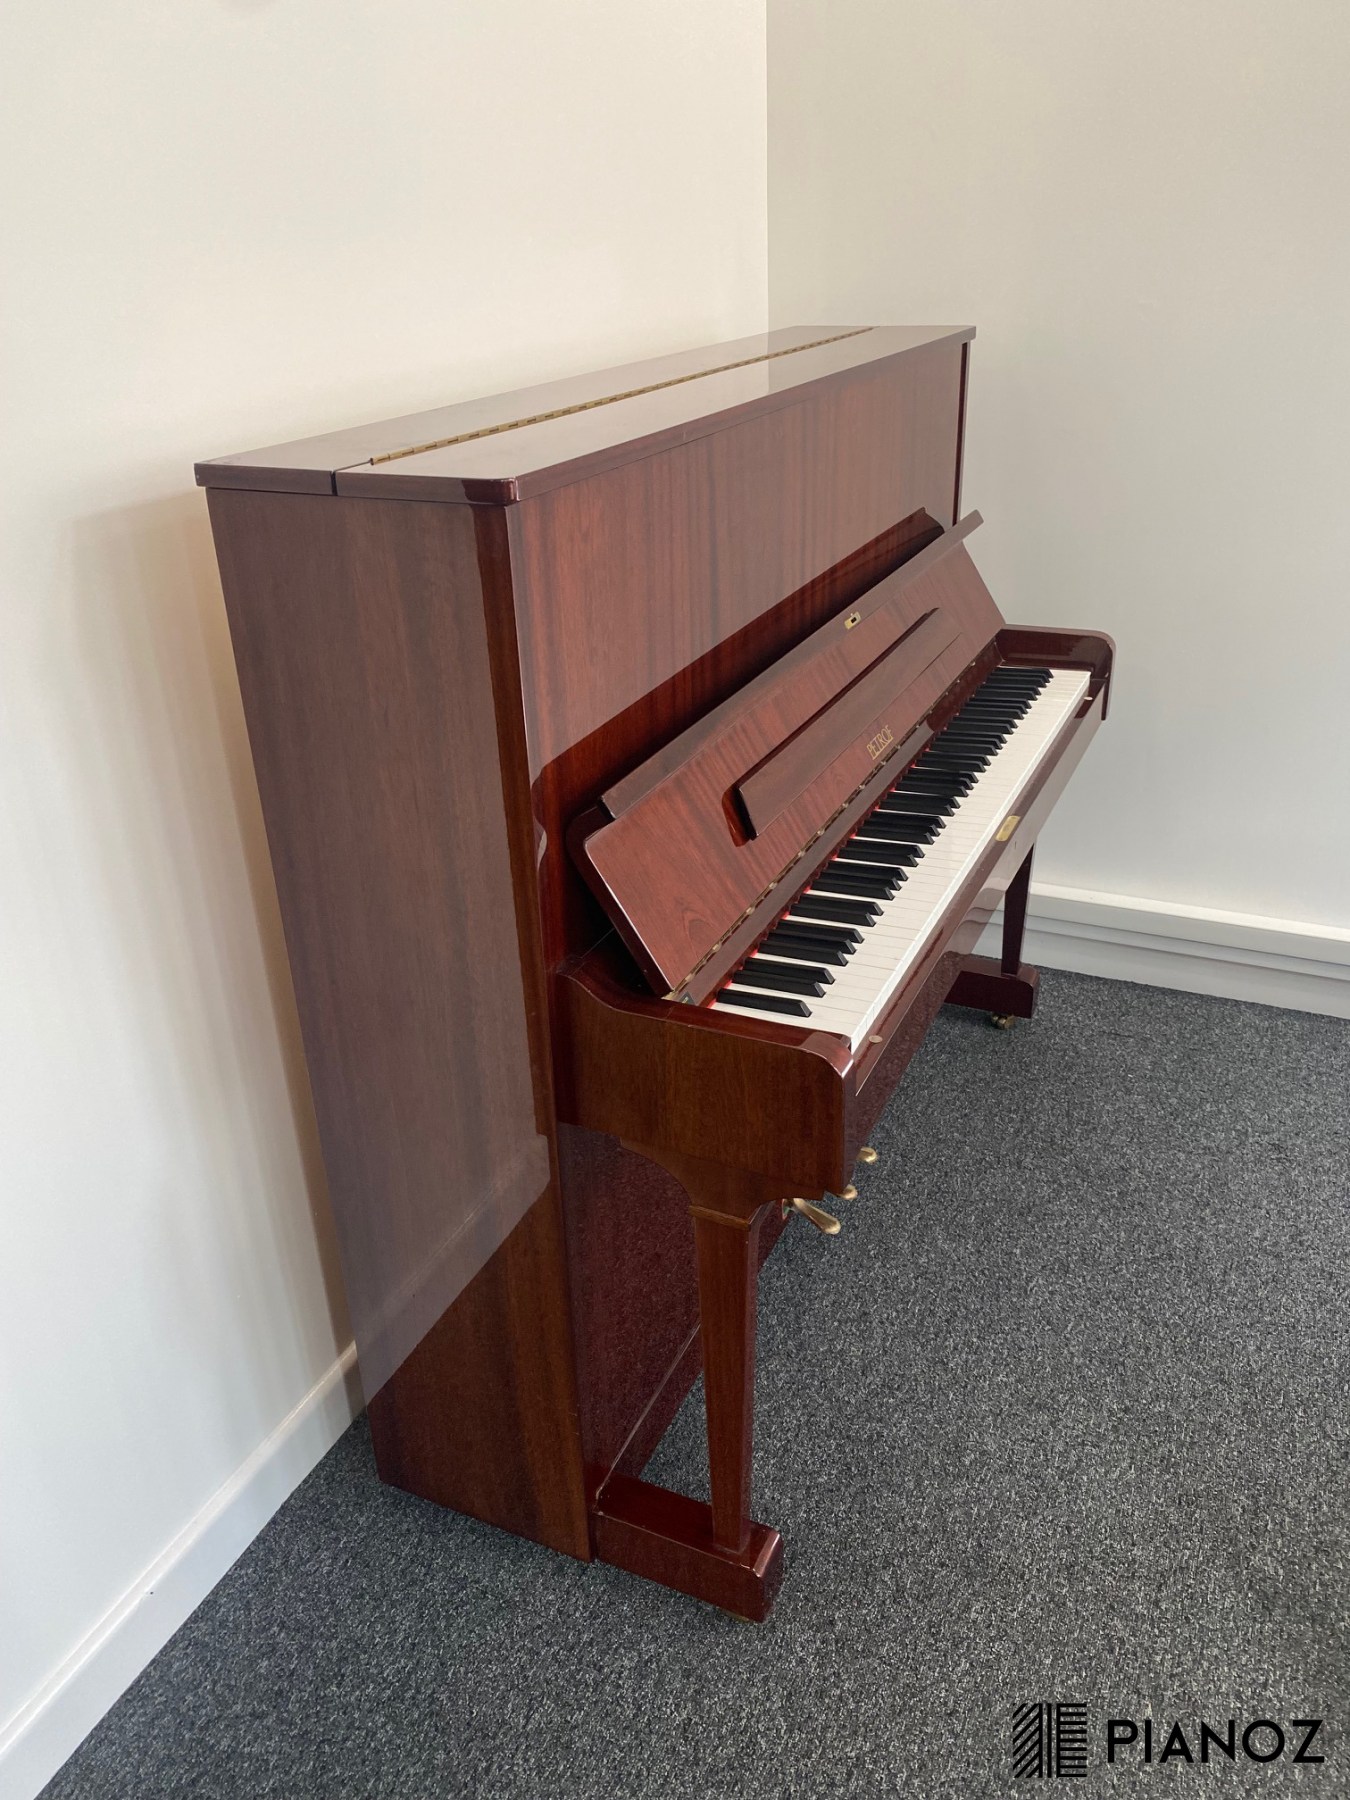 Petrof  125 Upright Piano piano for sale in UK